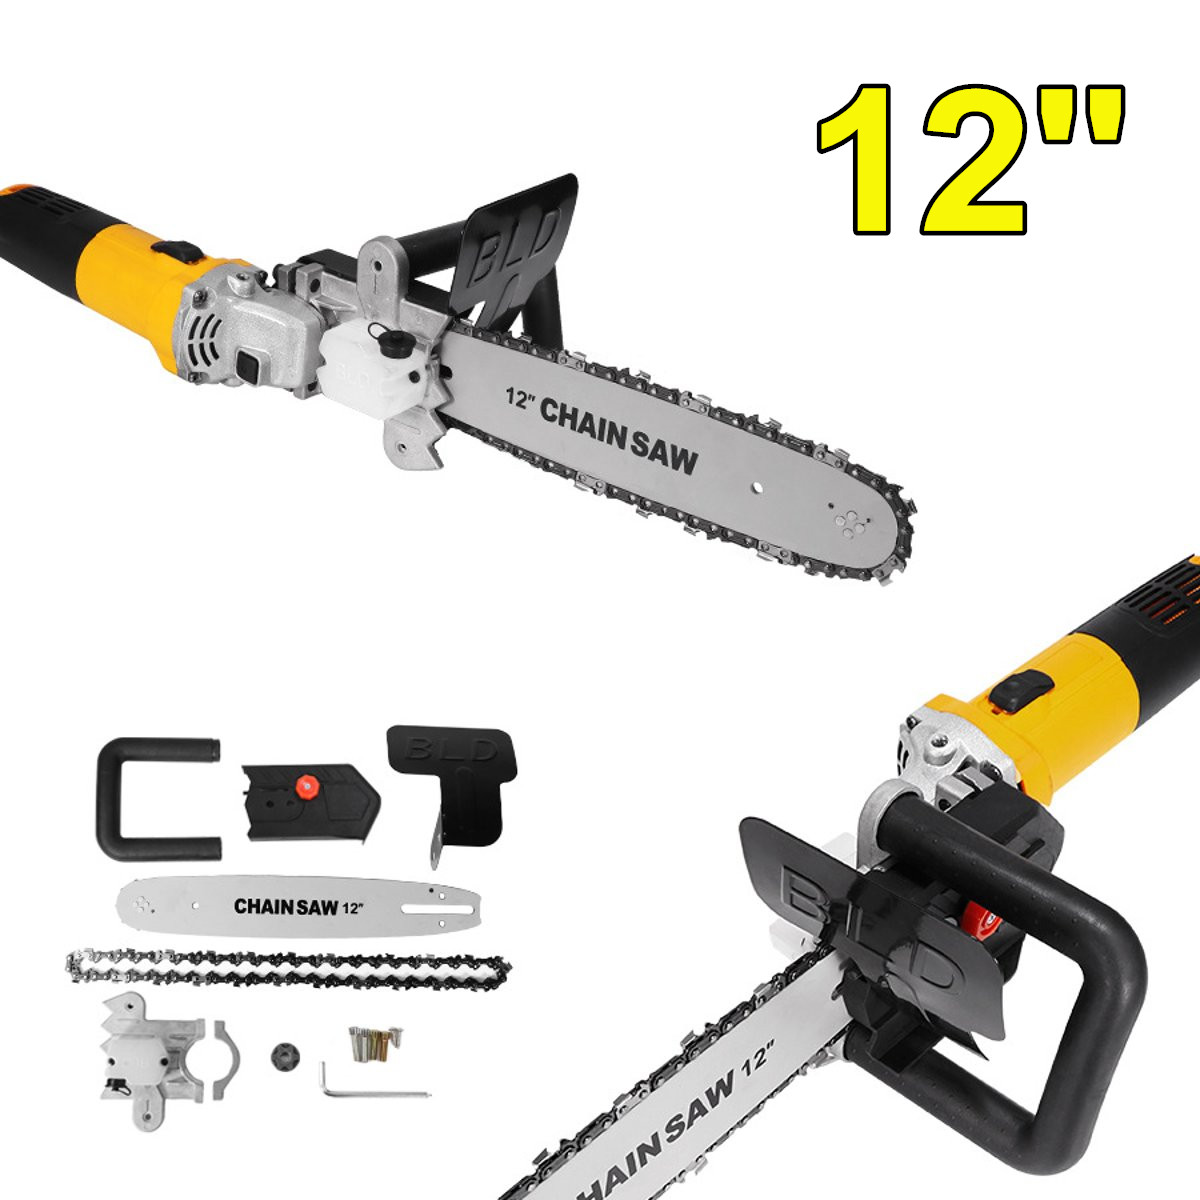 12-Inch-Chainsaw-Bracket-Electric-Chain-Saw-Stand-Set-Part-For-100-Angle-Grinder-1755370-4